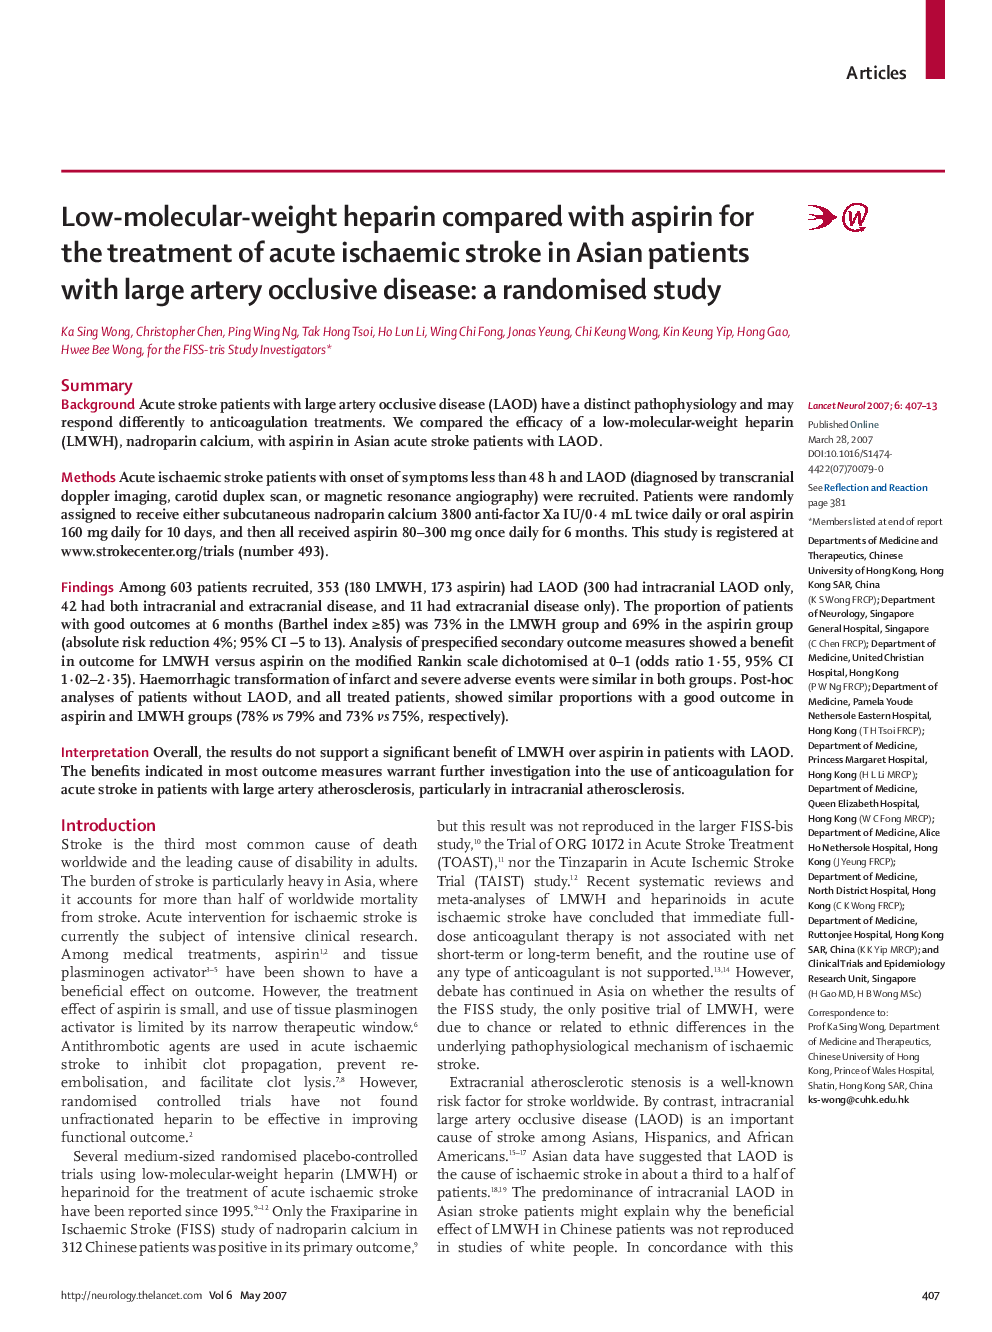 Low-molecular-weight heparin compared with aspirin for the treatment of acute ischaemic stroke in Asian patients with large artery occlusive disease: a randomised study